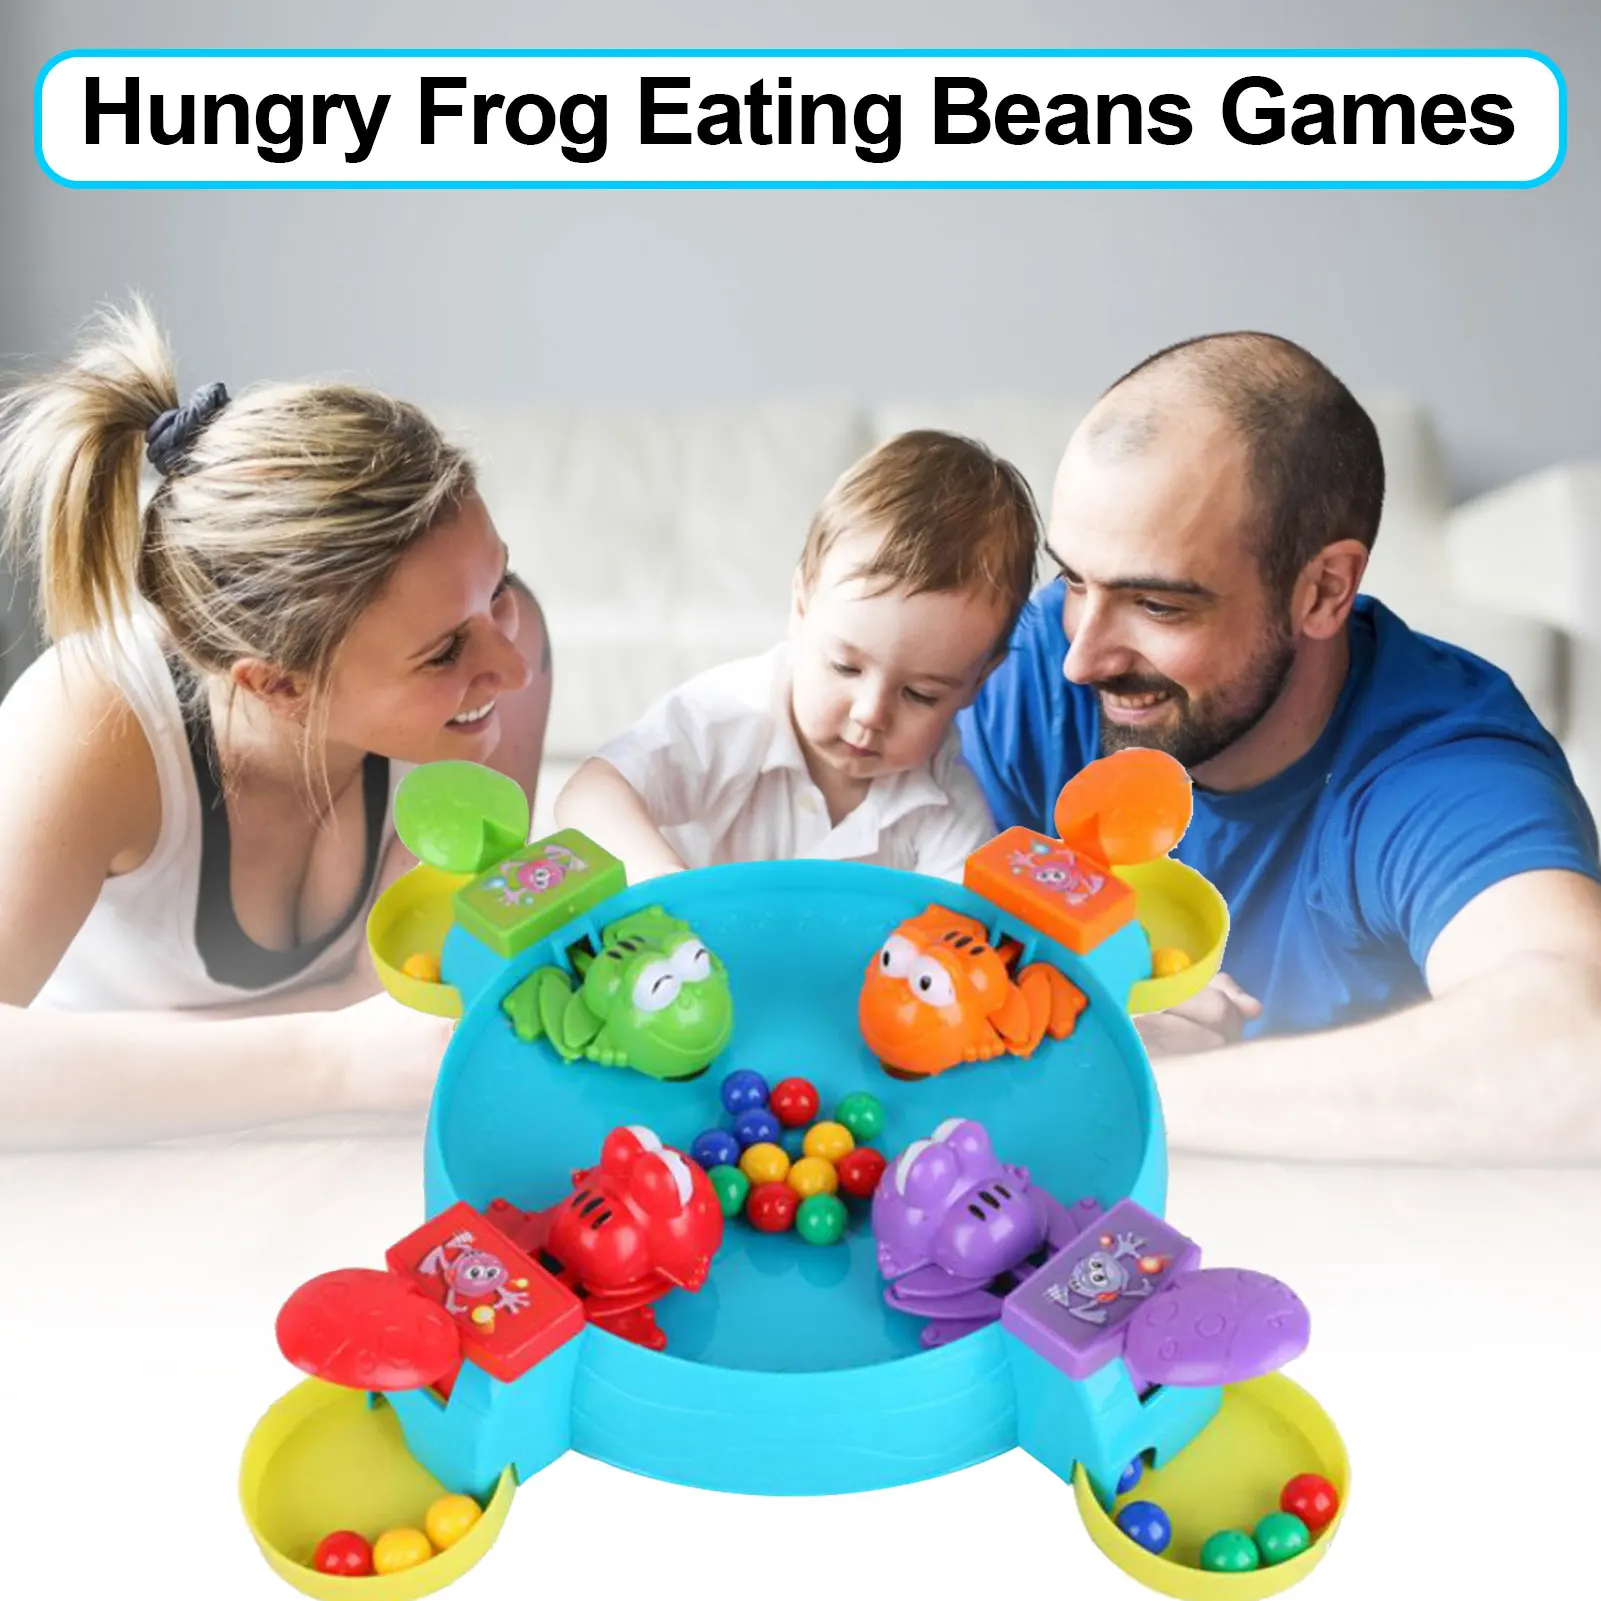 

Hungry Frog Eating Beans Games Toys Parent-Child Interactive Game Feeding The Bead Swallowing Frog To Eat Beans